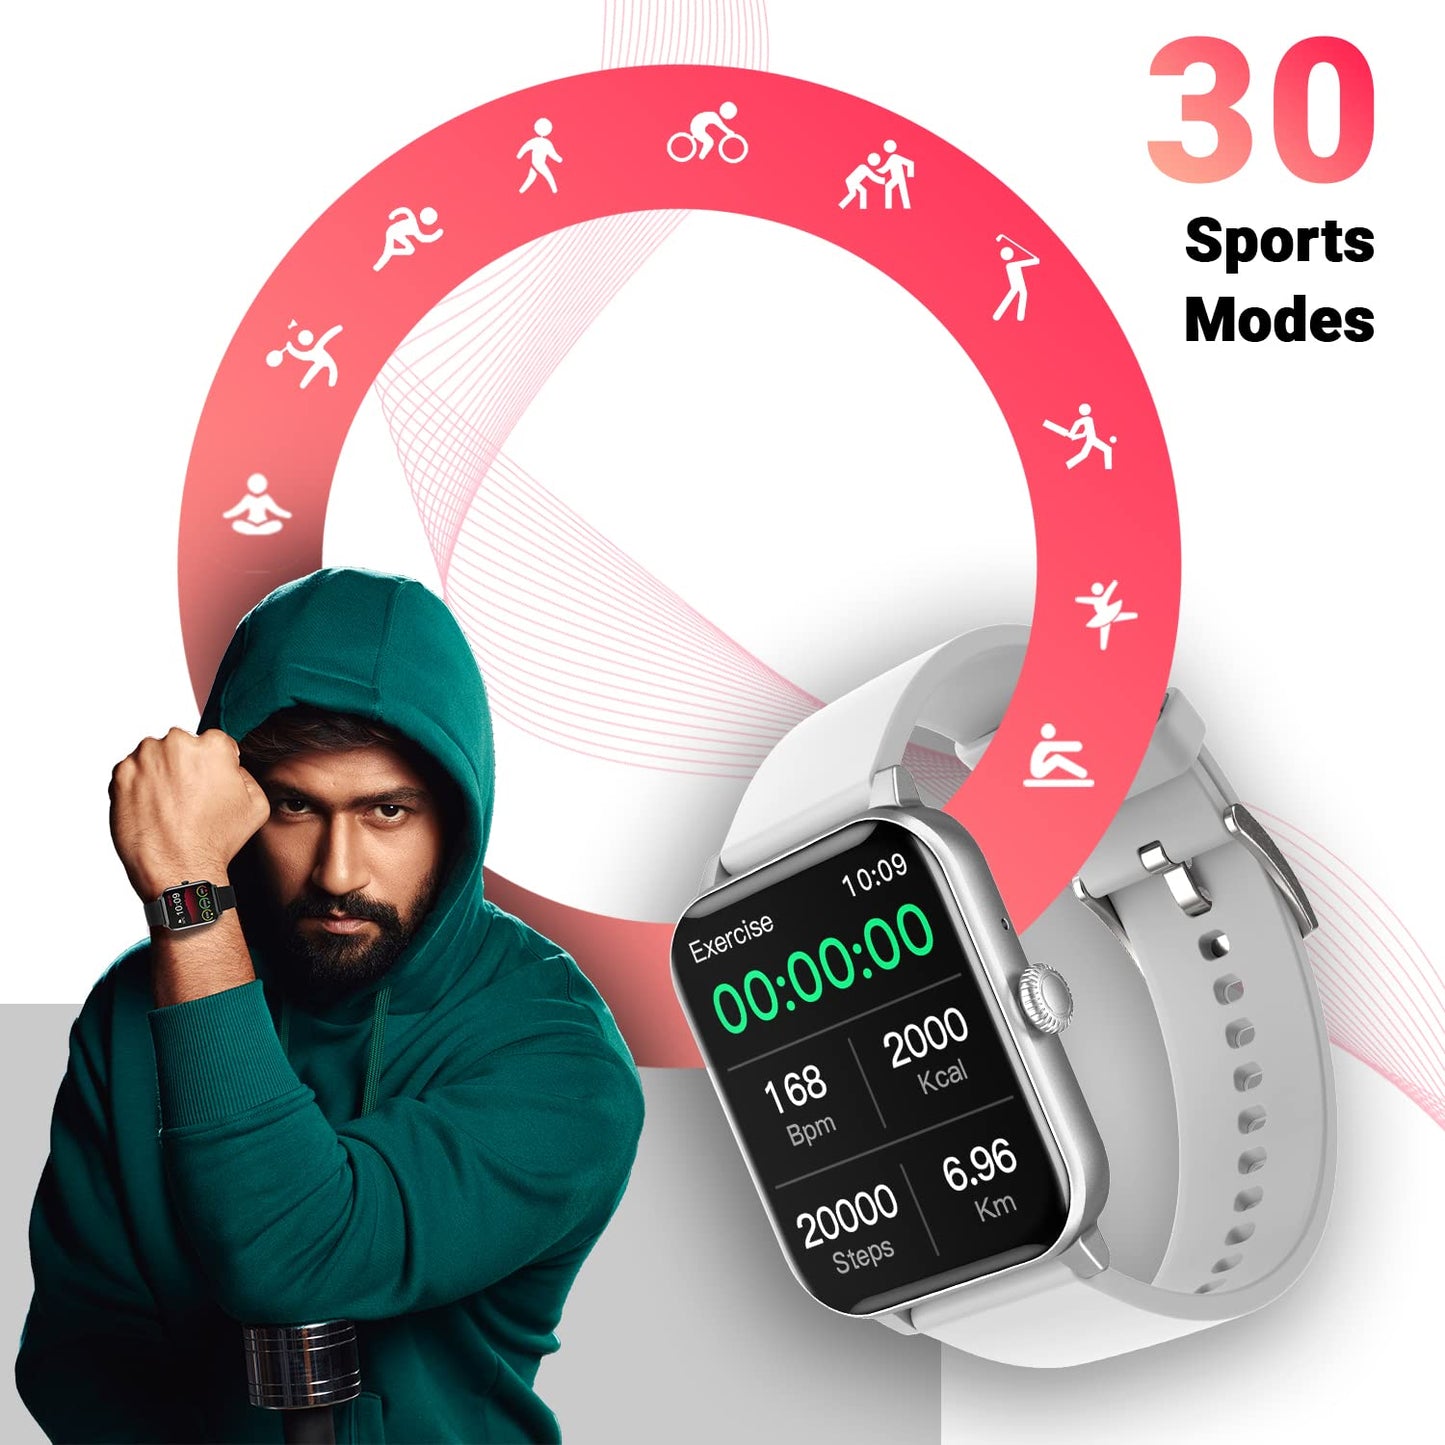 (Refurbished) Fire-Boltt Ninja Calling 1.69" Full Touch Bluetooth Calling Smartwatch with 30 Sports Mode, SpO2, Heart Rate Monitoring & AI Voice Assistant (Silver)